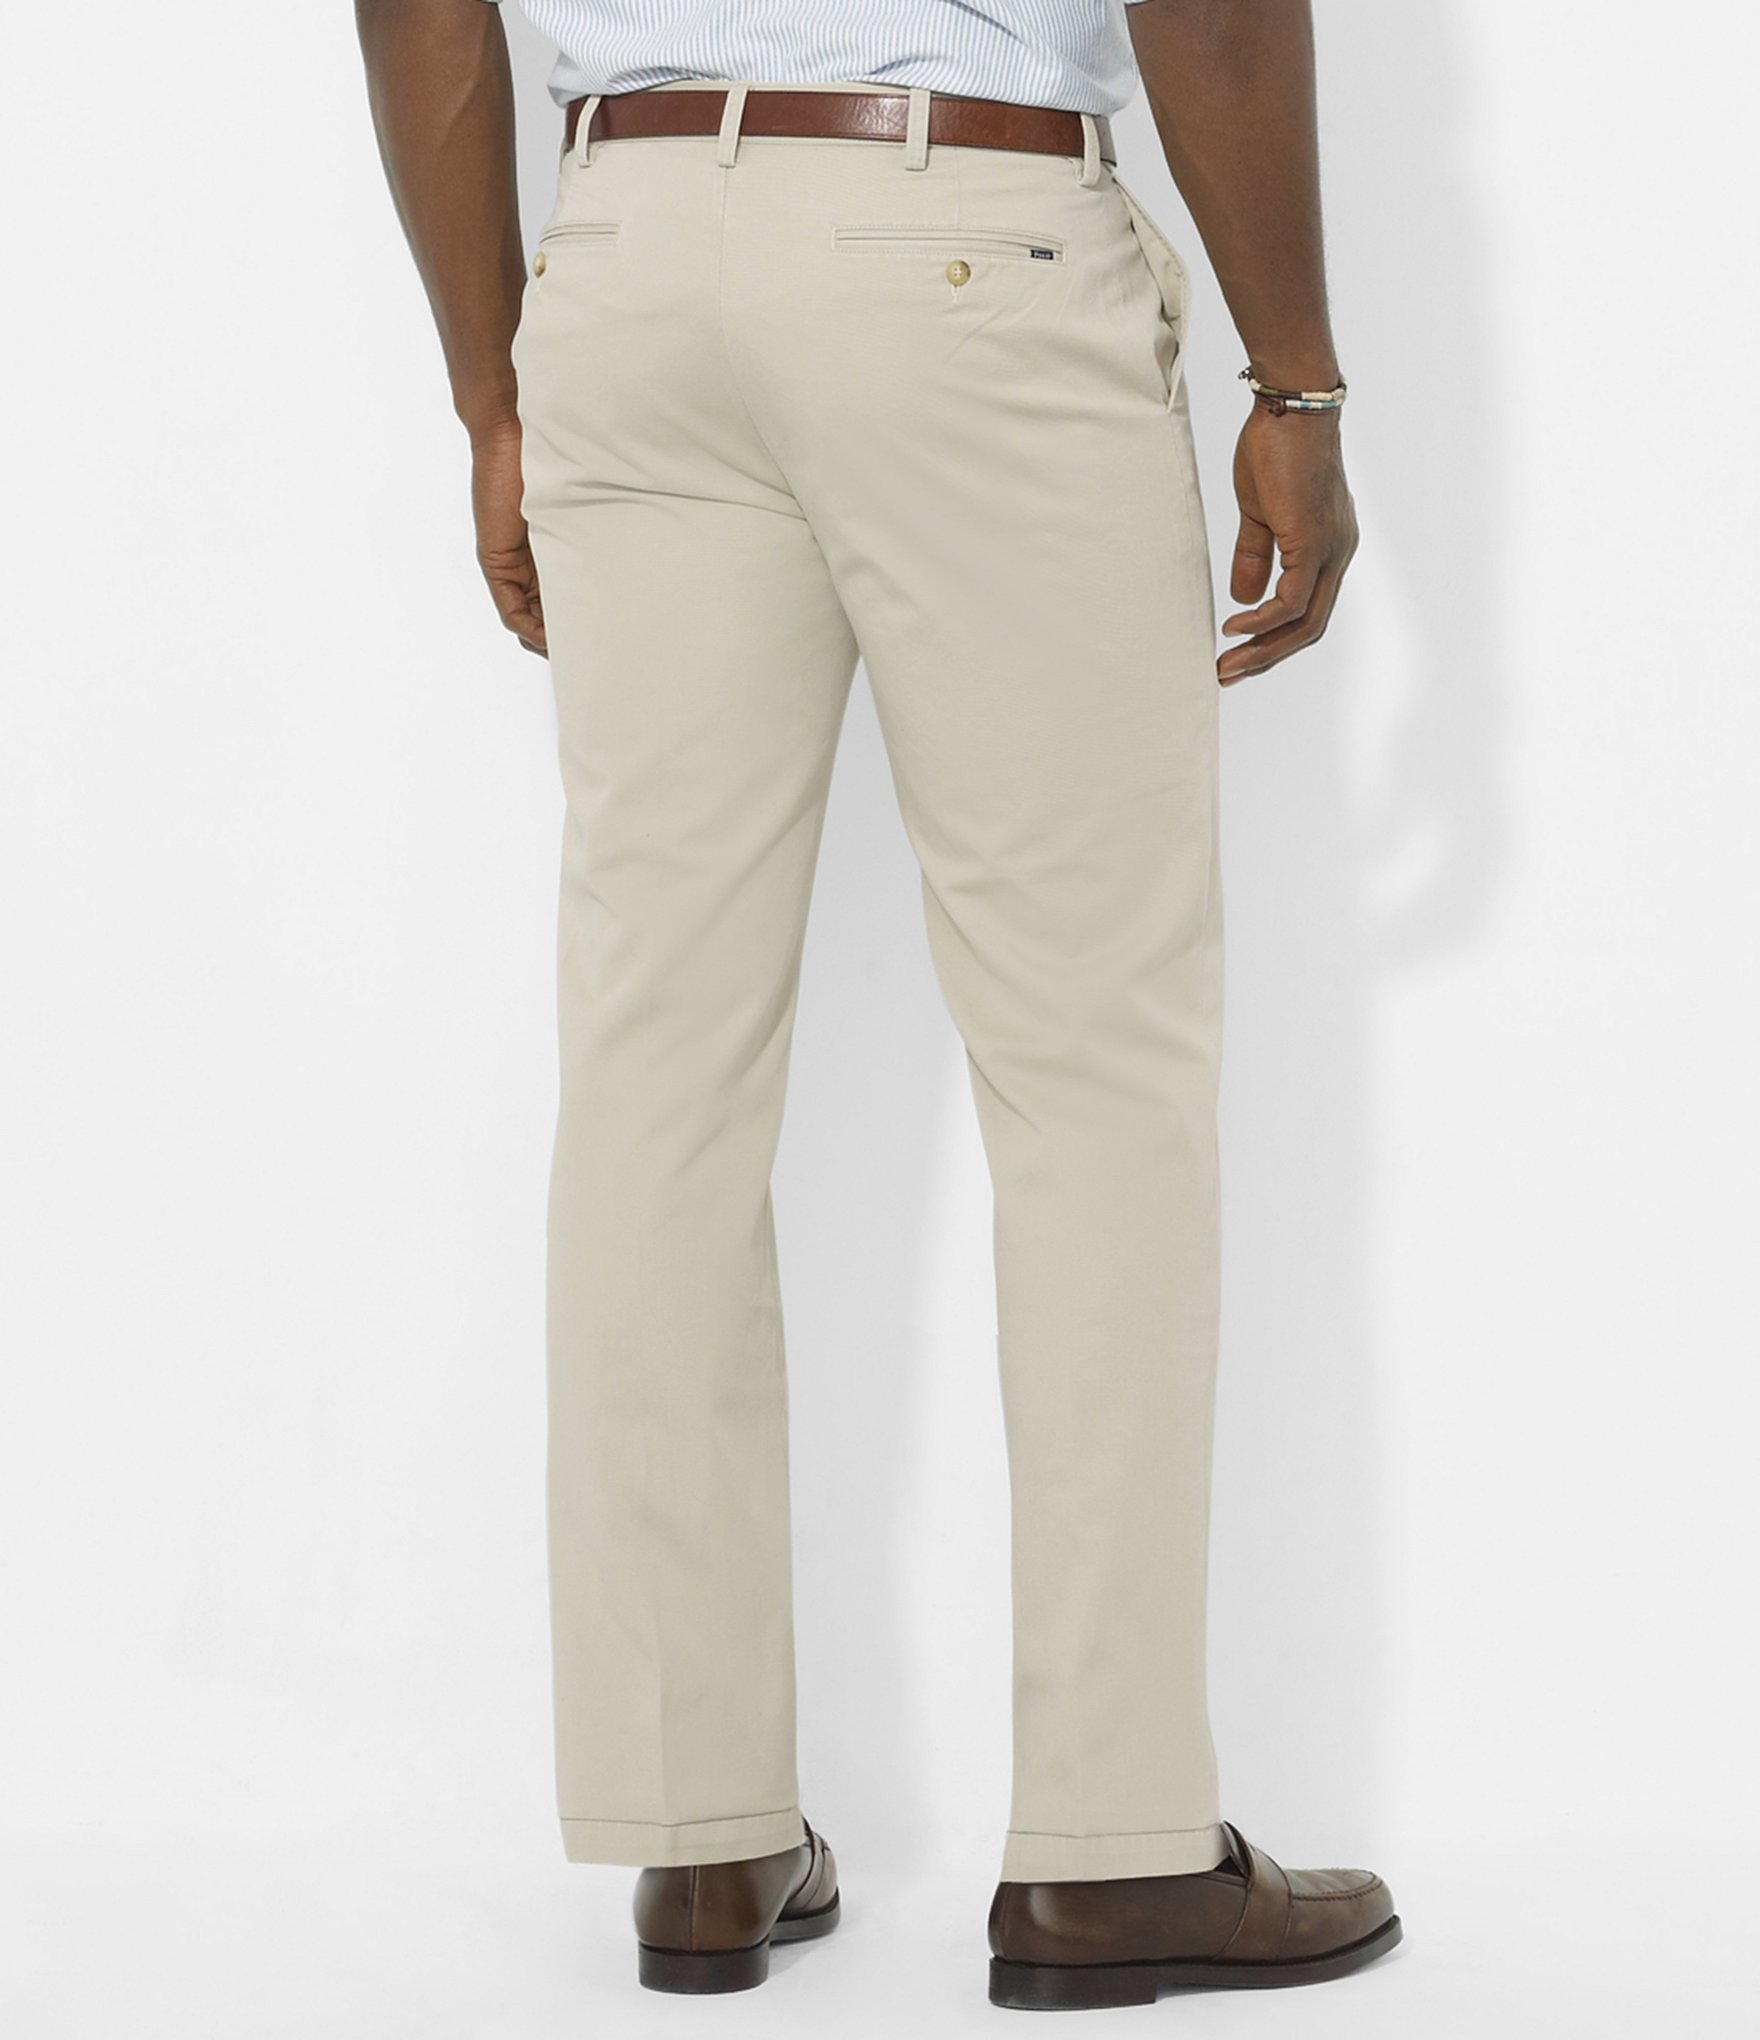 Lyst - Polo Ralph Lauren Big & Tall Classic-fit Flat-front Chino Pants ...